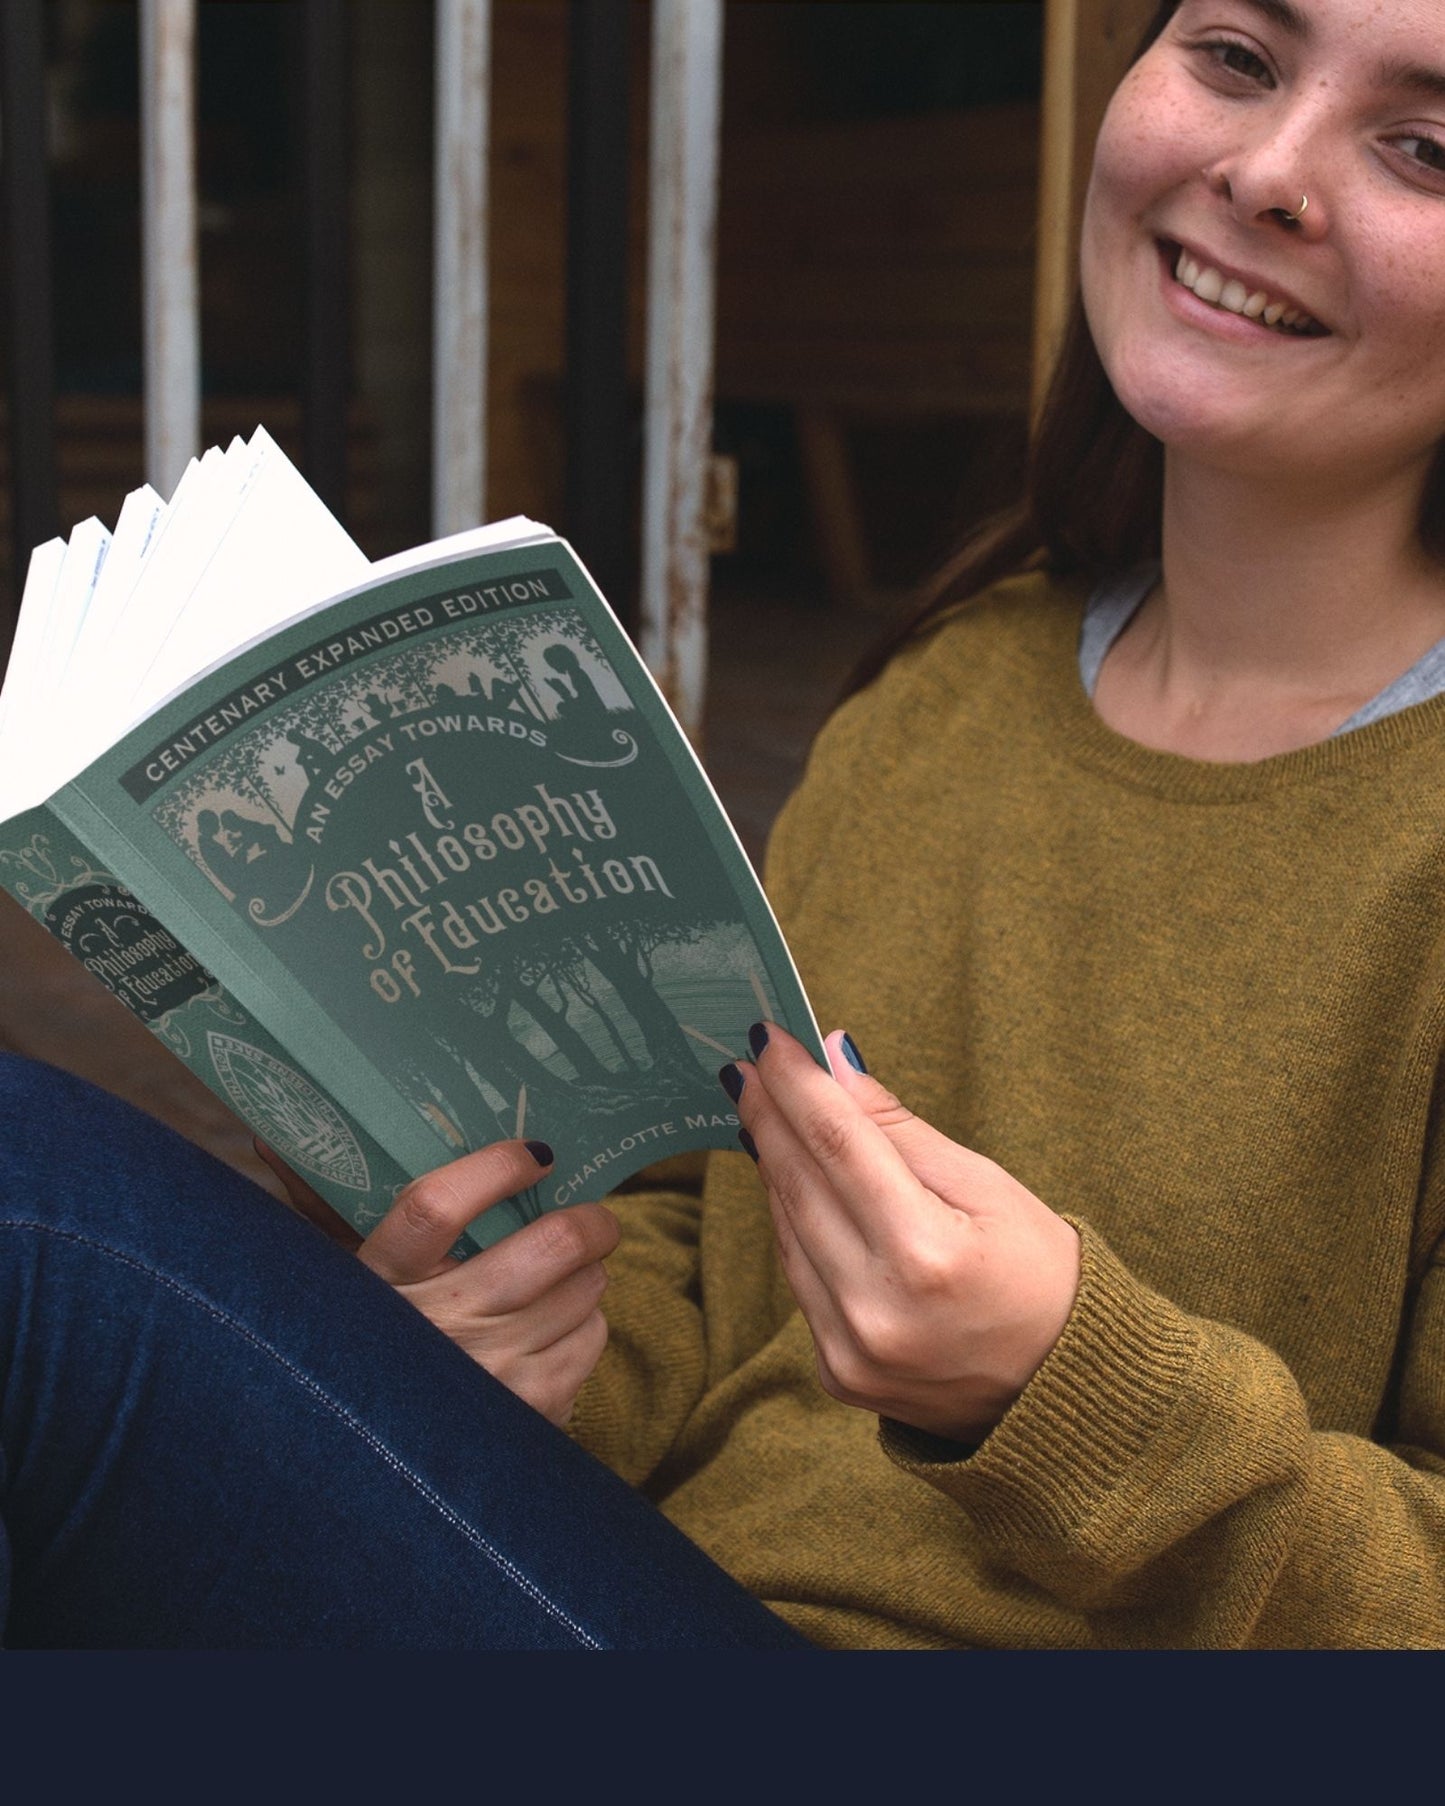 A smiling white girl in jeans and a gold sweater smiles while holding open the paperback edition of the sage colored An Essay Towards A Philosophy of Eduction.